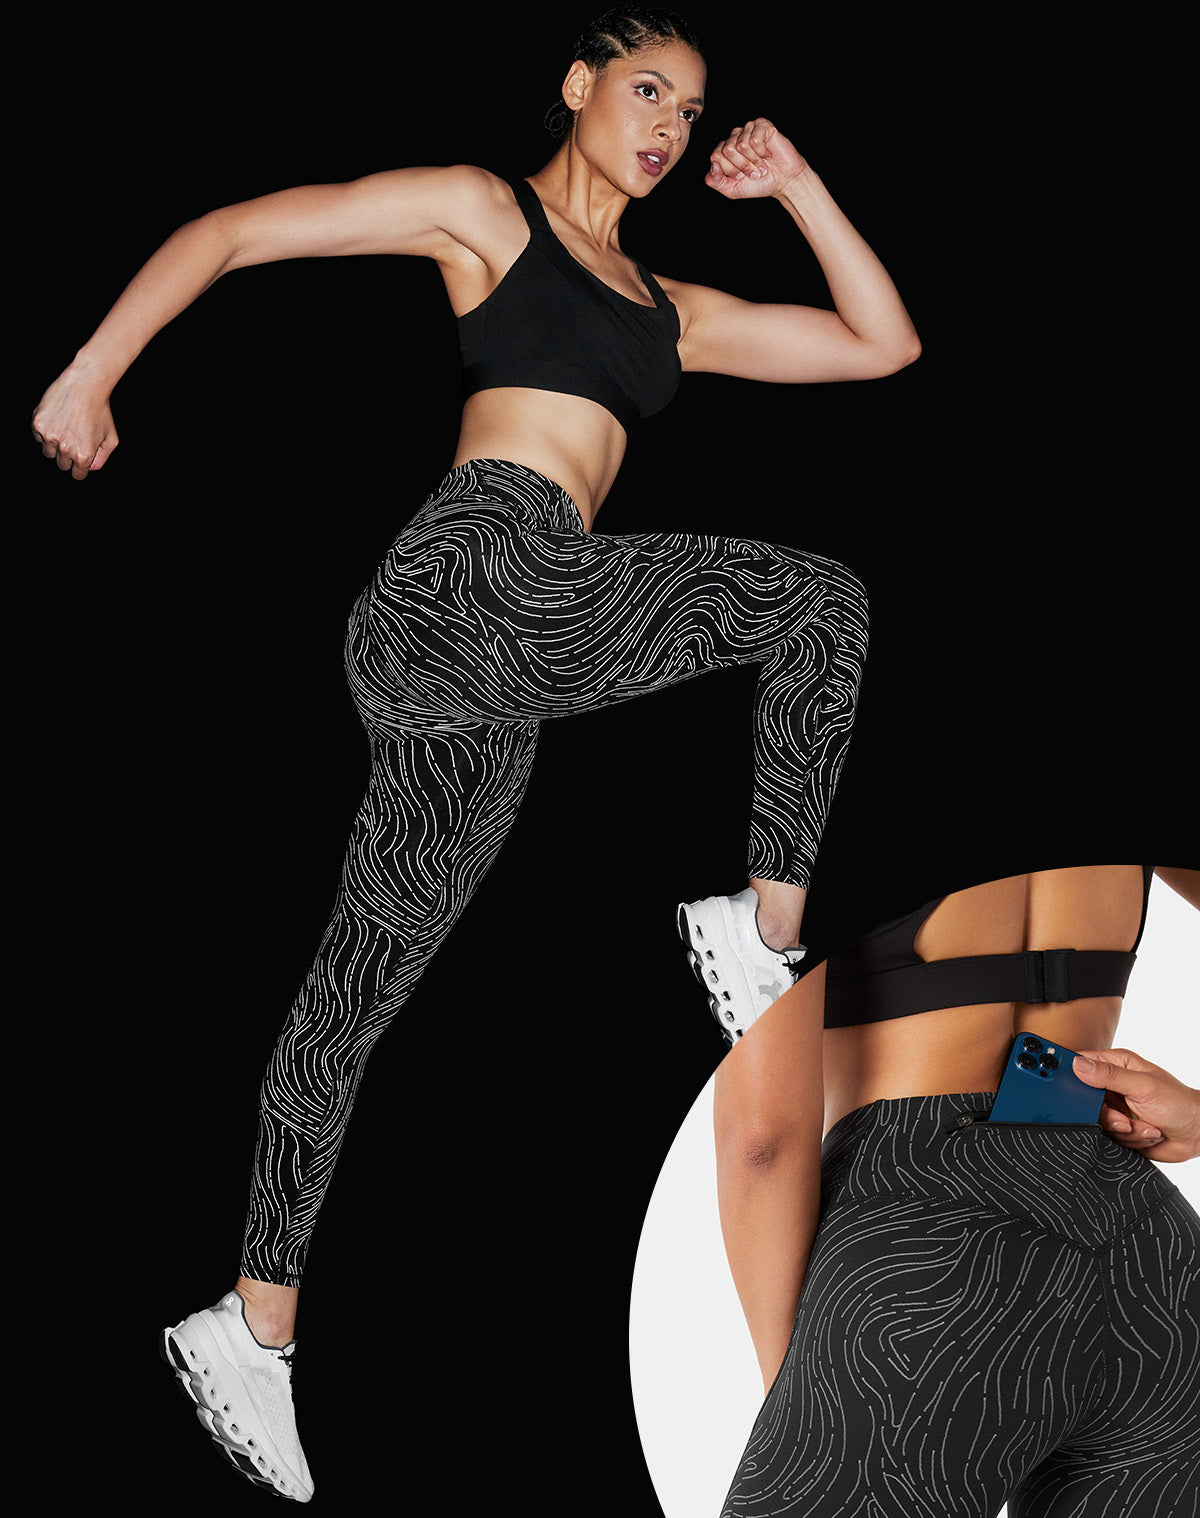 Night Runners Love These Reflective Leggings, They Have a Secret